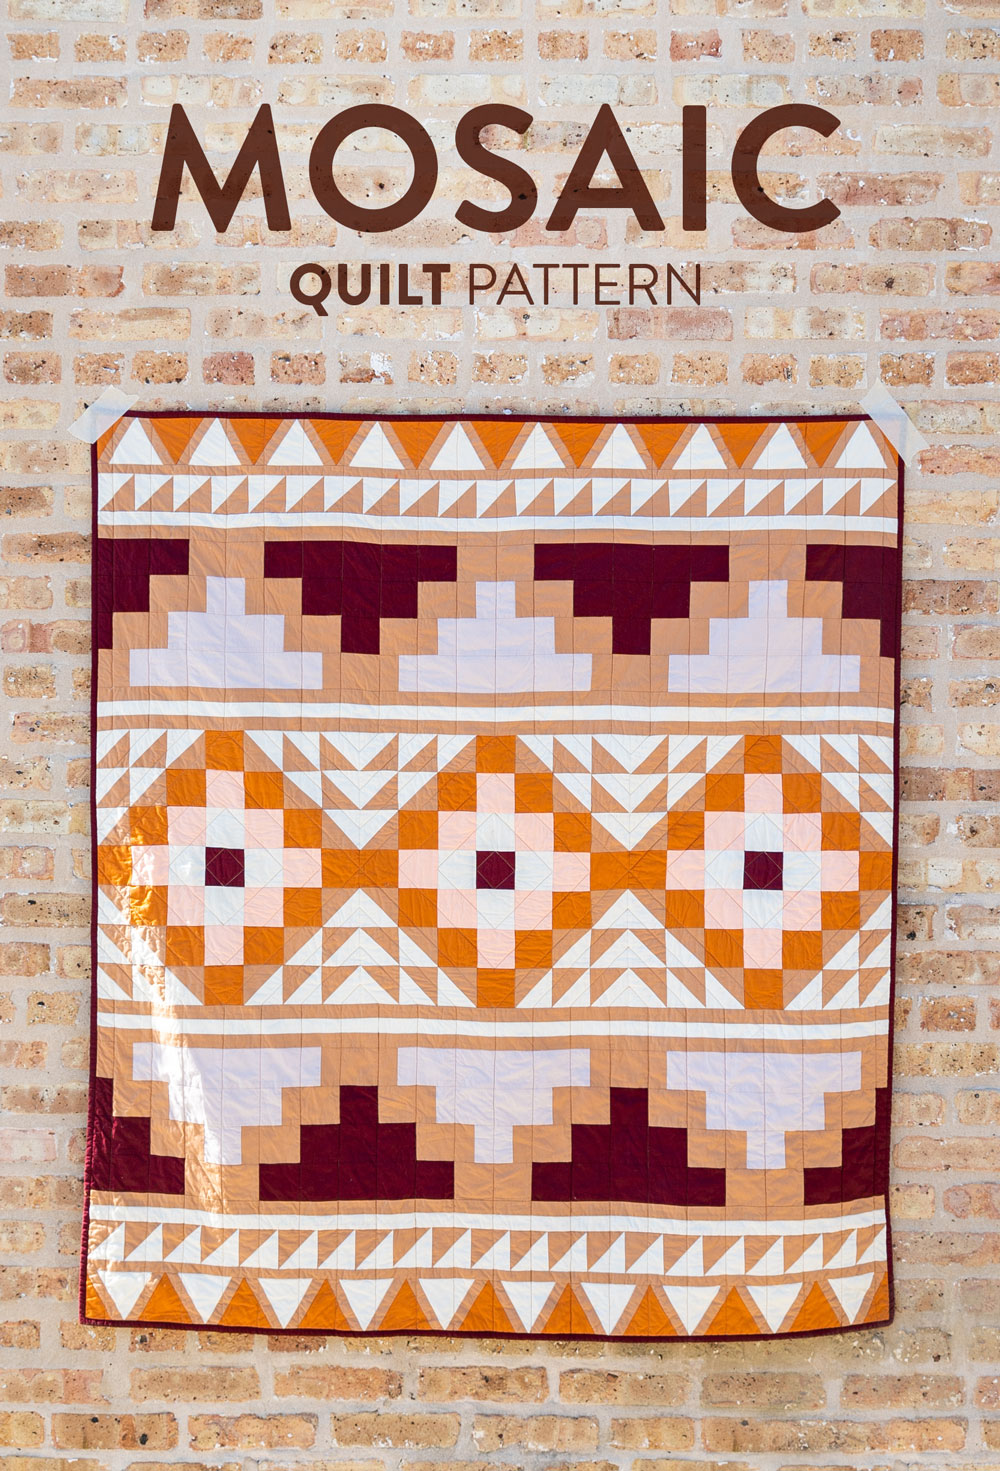 Be inspired by colors of the desert and make your own Mosaic quilt. With warm solid fabrics, this quilt pattern looks modern and timeless! suzyquilts.com #quiltkit #quiltpattern